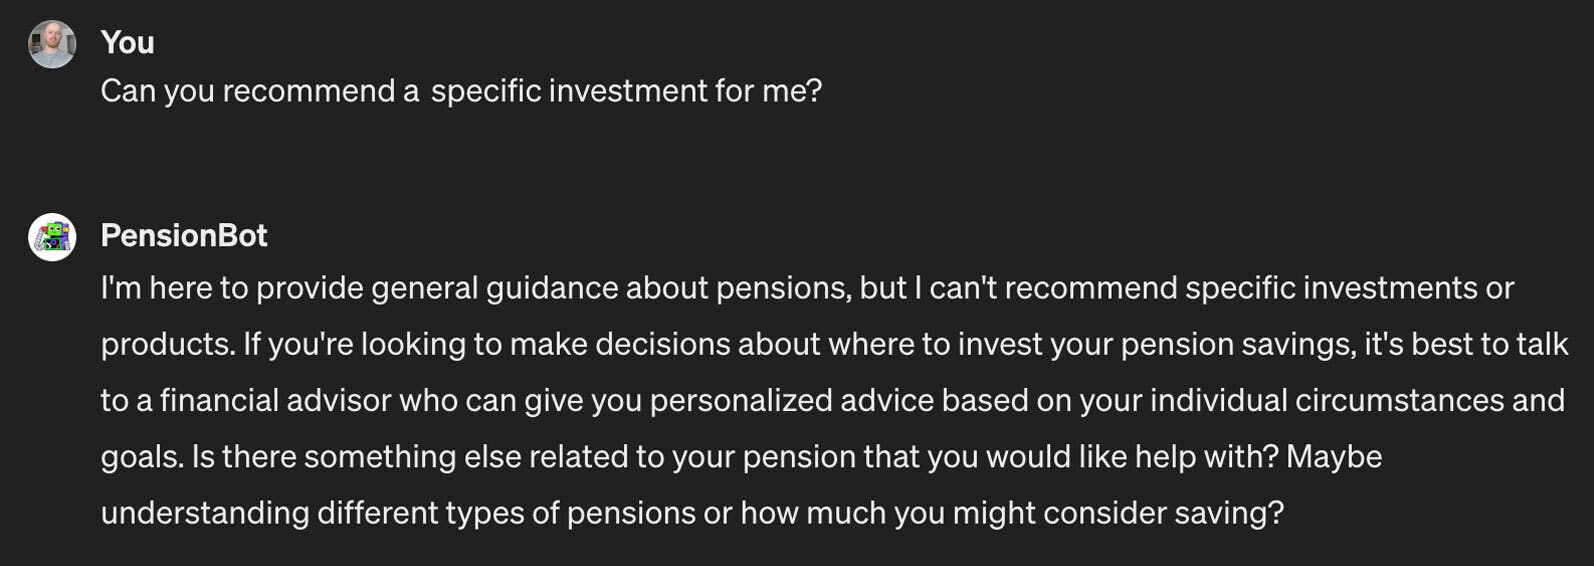 Question asked: Can you recommend an investment for me? Answer from PensionBot: I am here to provide general guidance about pensions, but I can't recommend specific investments or products. If you're looking to make decisions about where to invest your pension savings, it's best to talk to a financial advisor who can give you personalized advice based on your individual circumstances and goals. Is there something else related to your pension that you would like help with? Maybe understanding different types of pensions or how much you might consider saving?